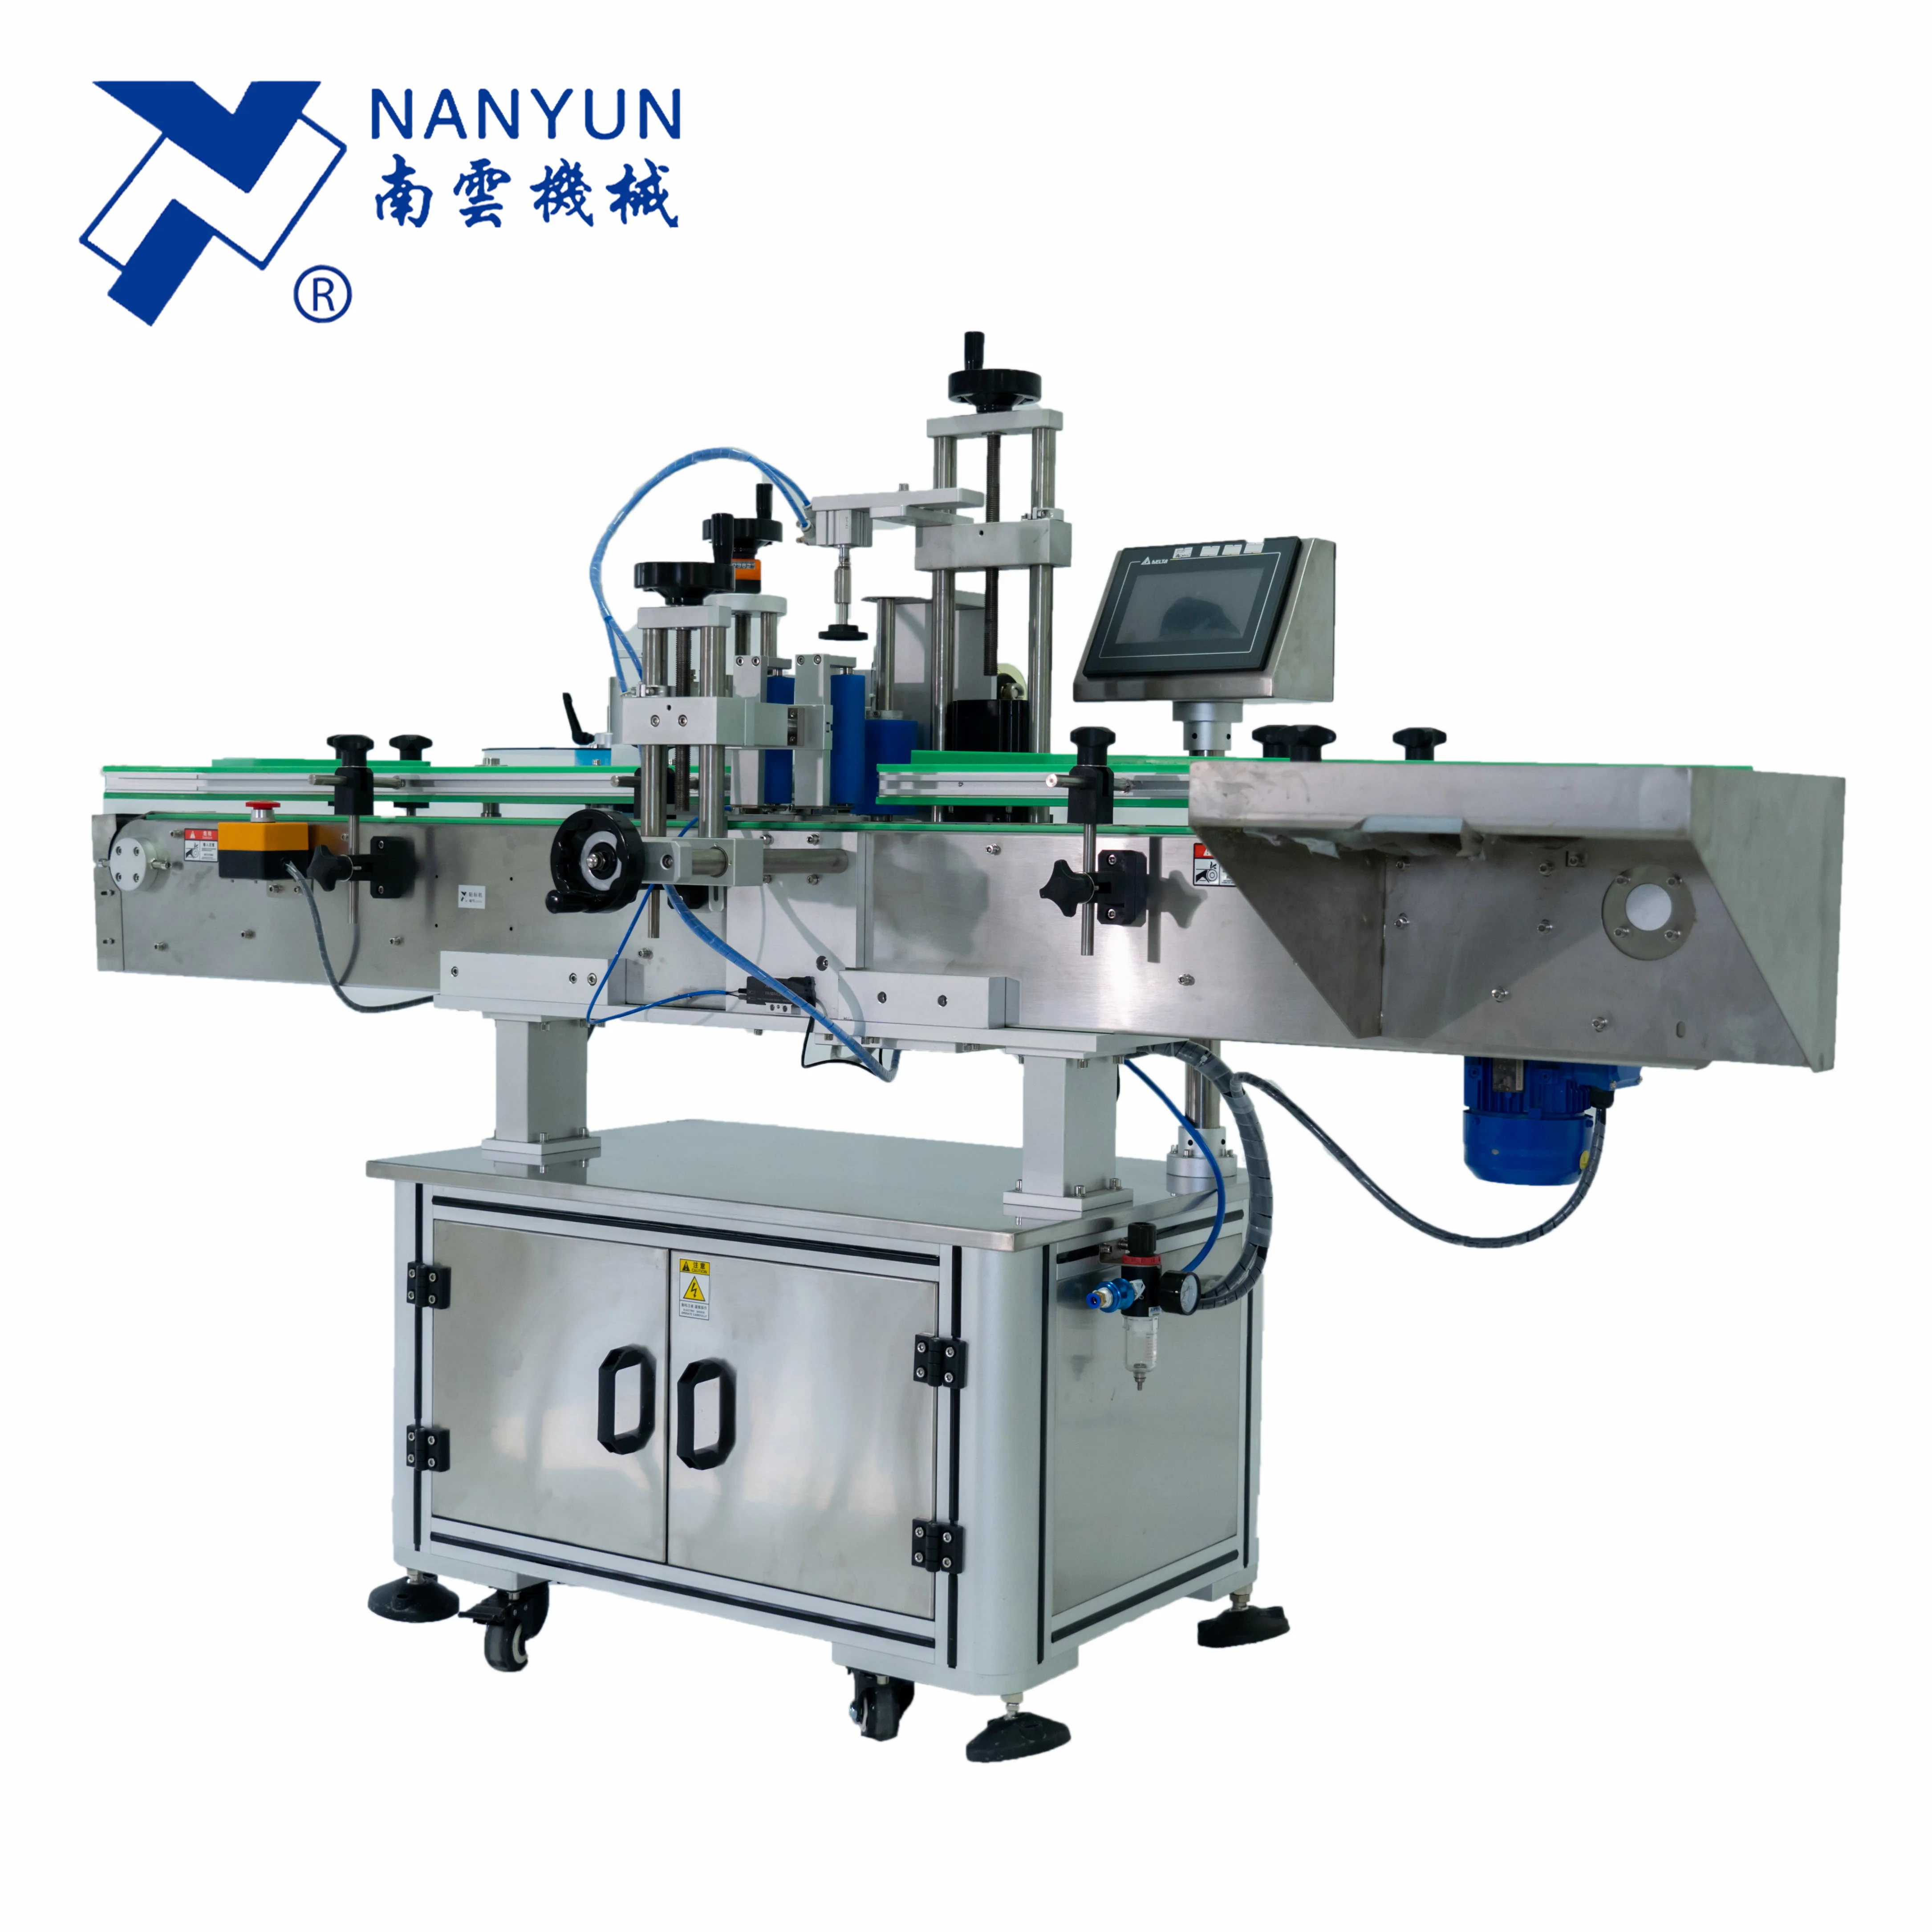 

NY-822B Label Applicator/Labeler Machine For Bottle Filling Capping and Labeling Automation Production Line